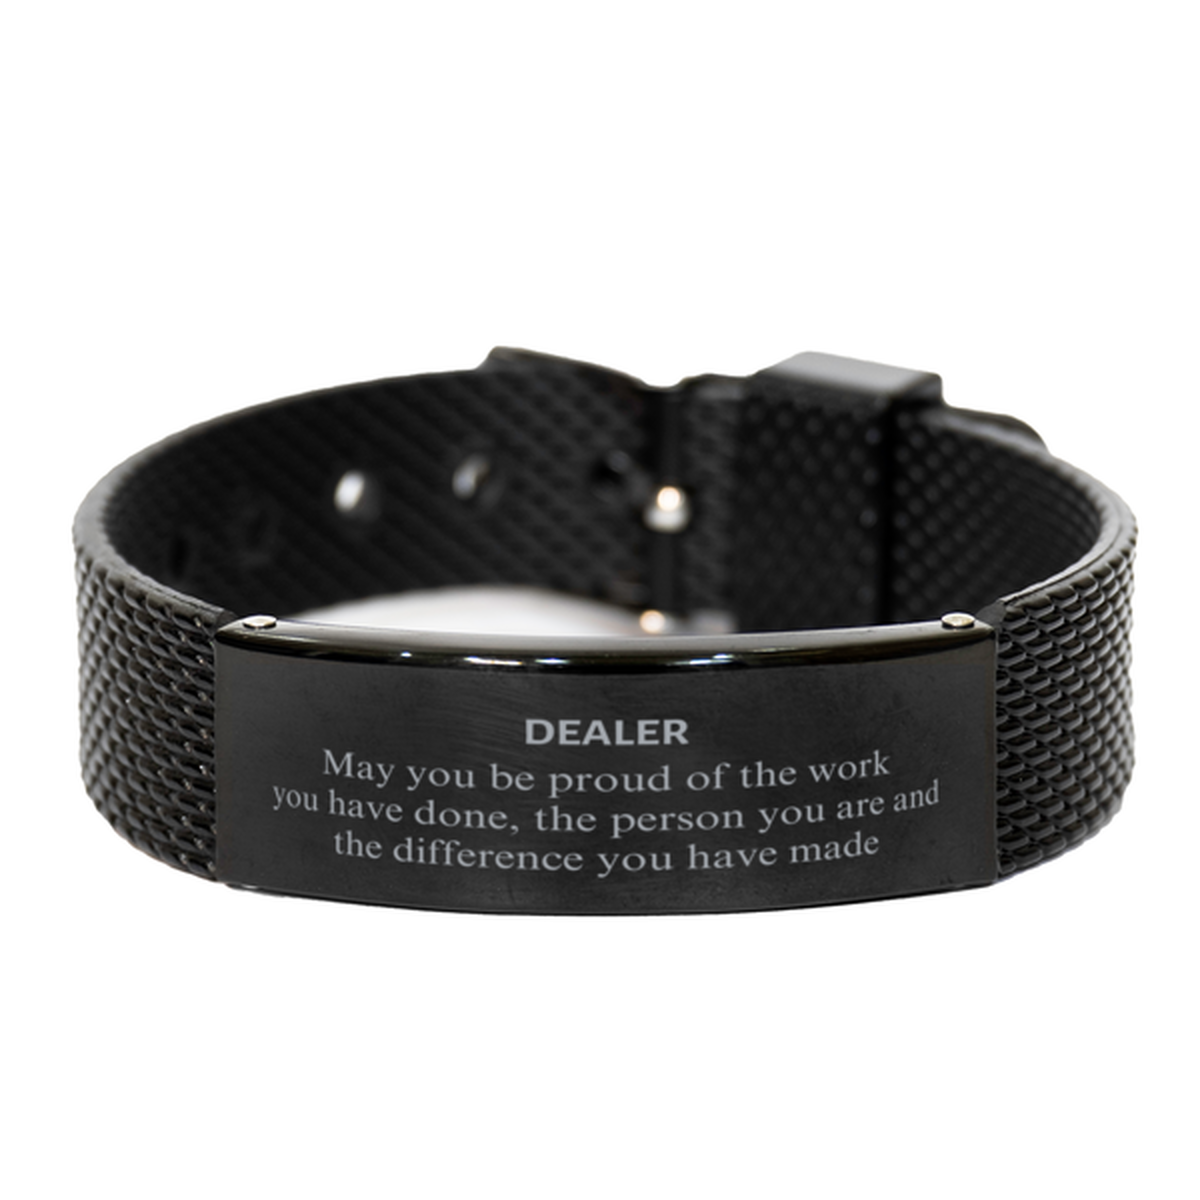 Dealer May you be proud of the work you have done, Retirement Dealer Black Shark Mesh Bracelet for Colleague Appreciation Gifts Amazing for Dealer